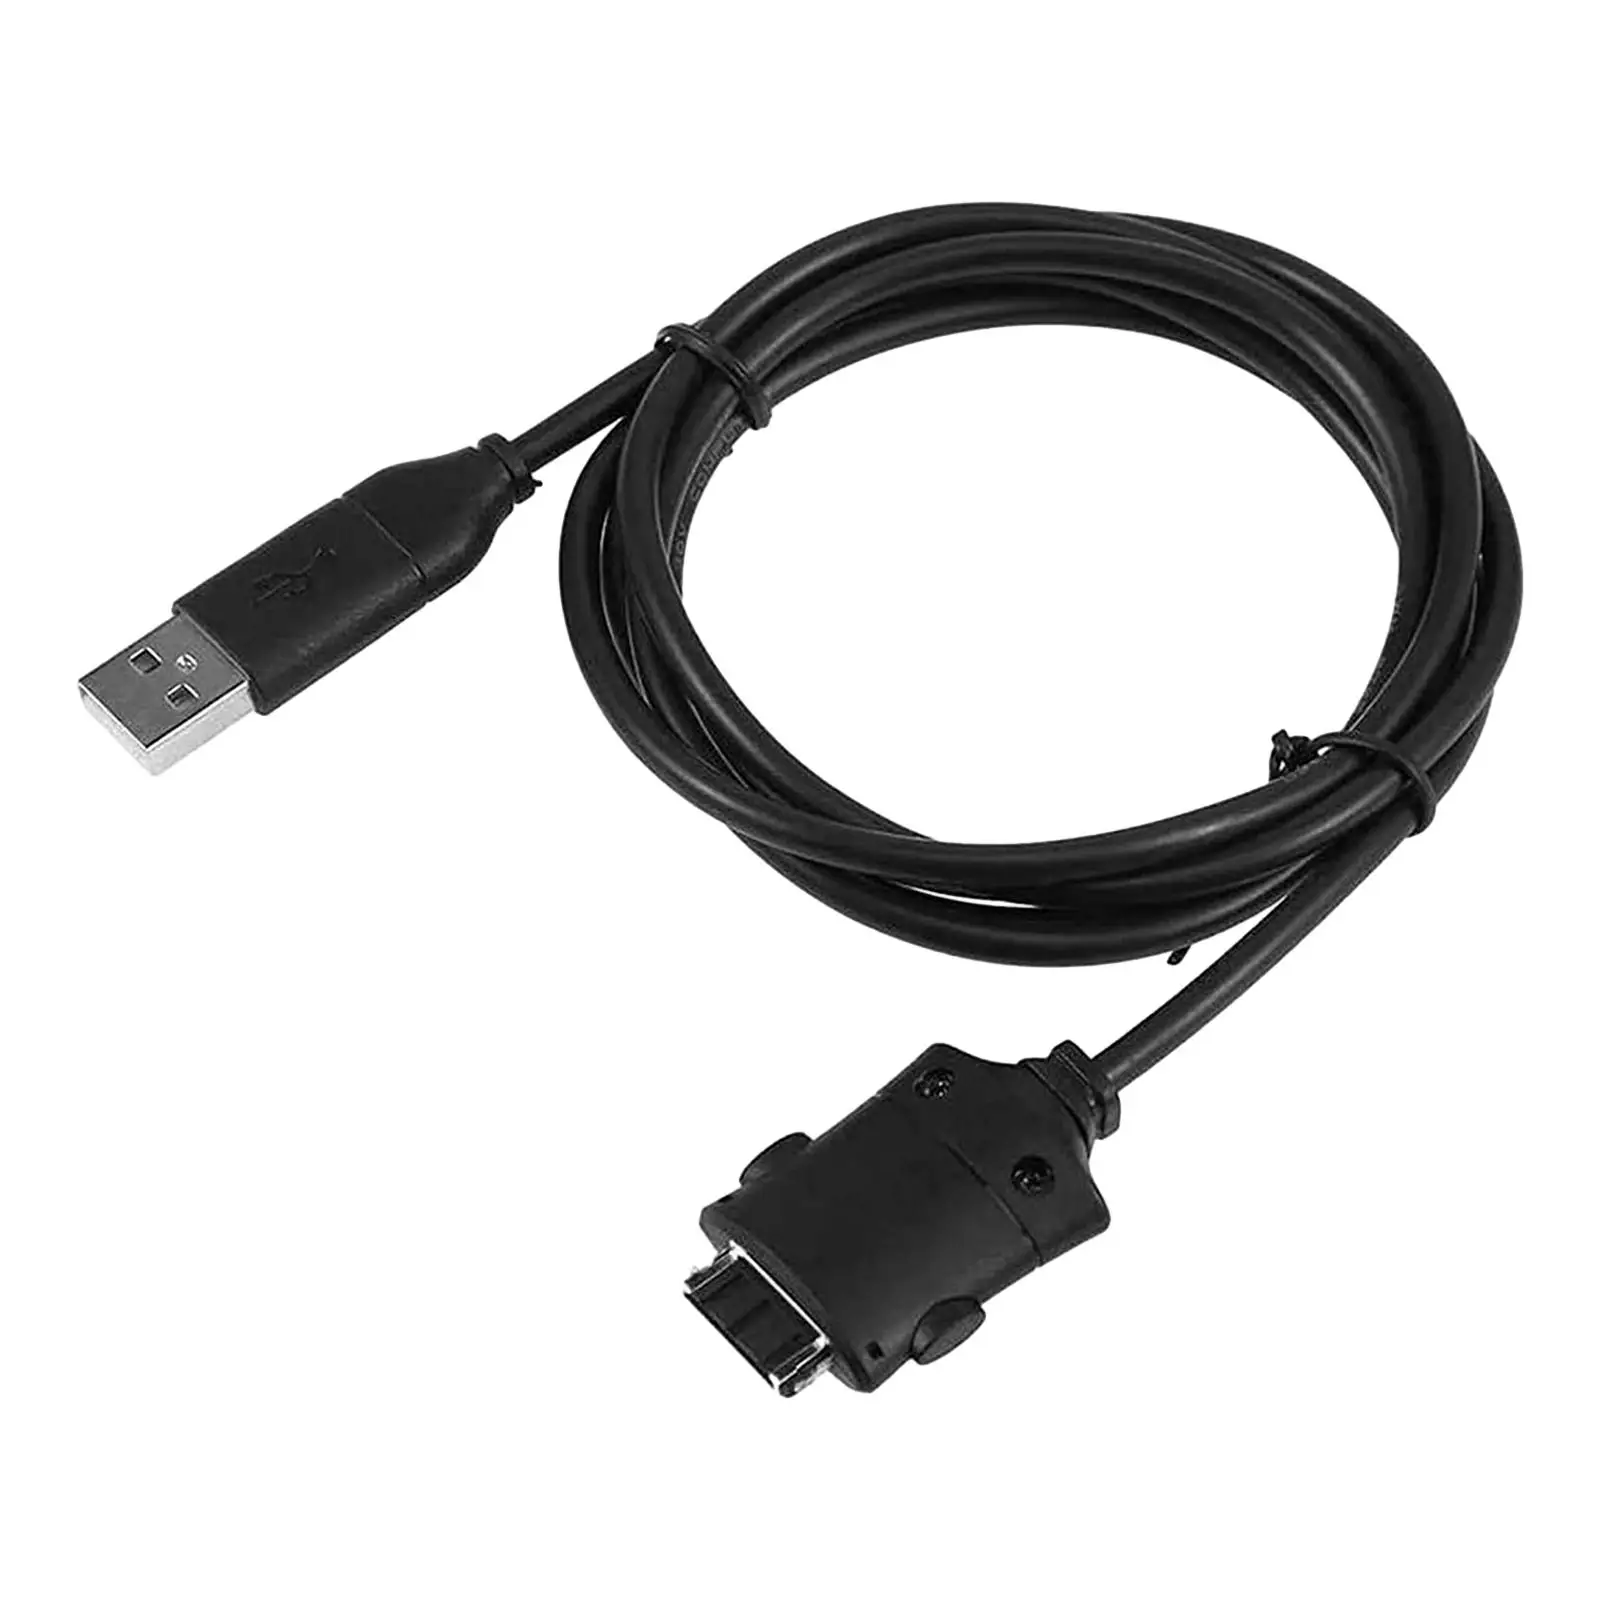 Suc-c2 USB Data Charging Cable Cord Accessories Professional Replacement Transfer Cord Black for Digital Camera L730 L73 i7 Nv11